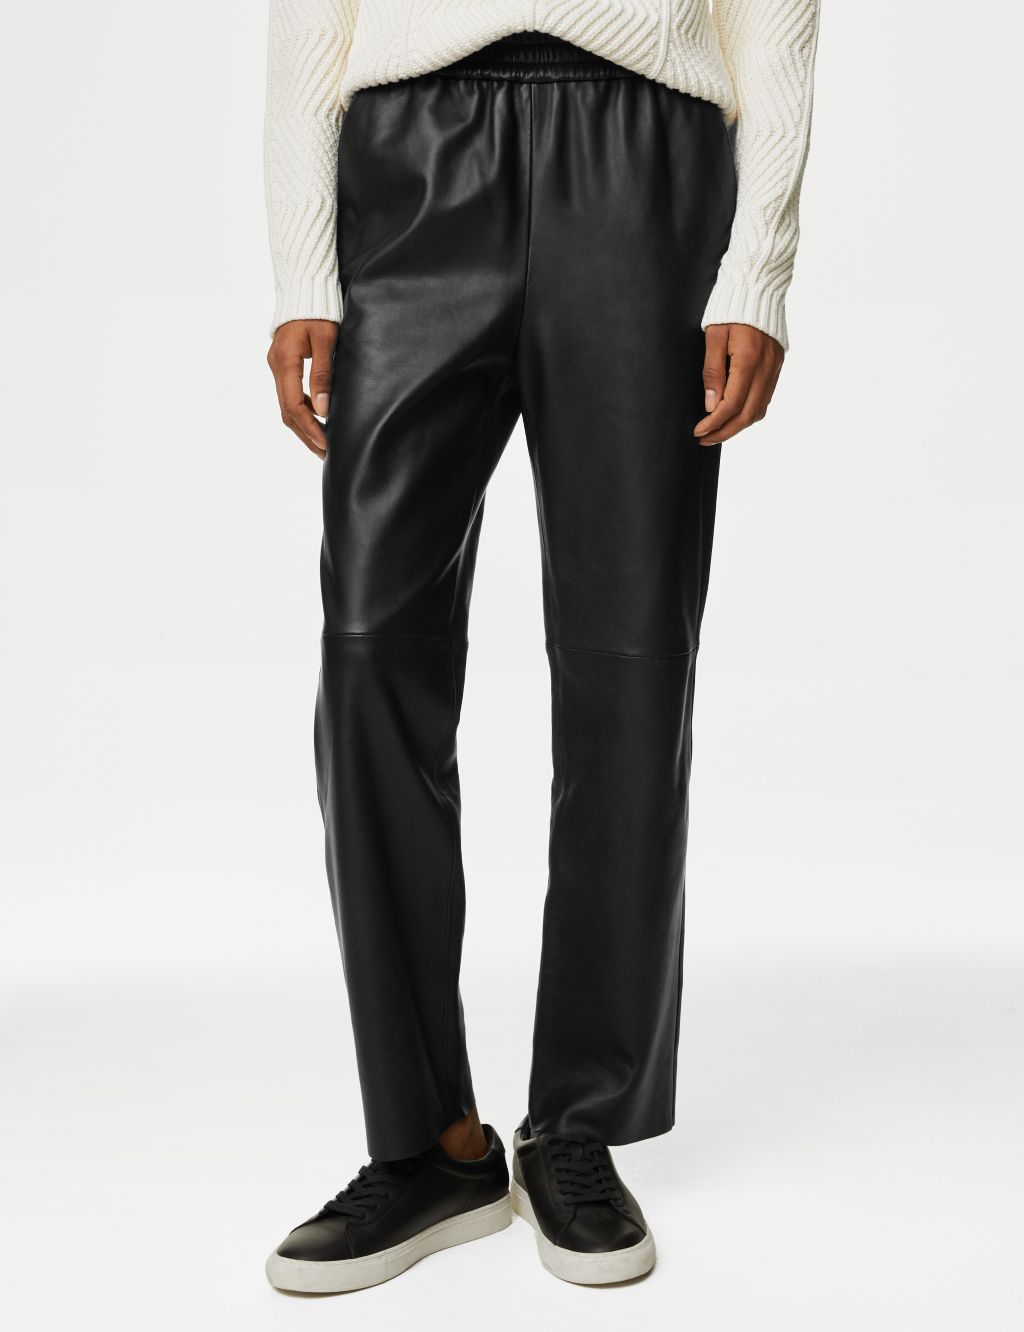 Leather Straight Leg Trousers image 4